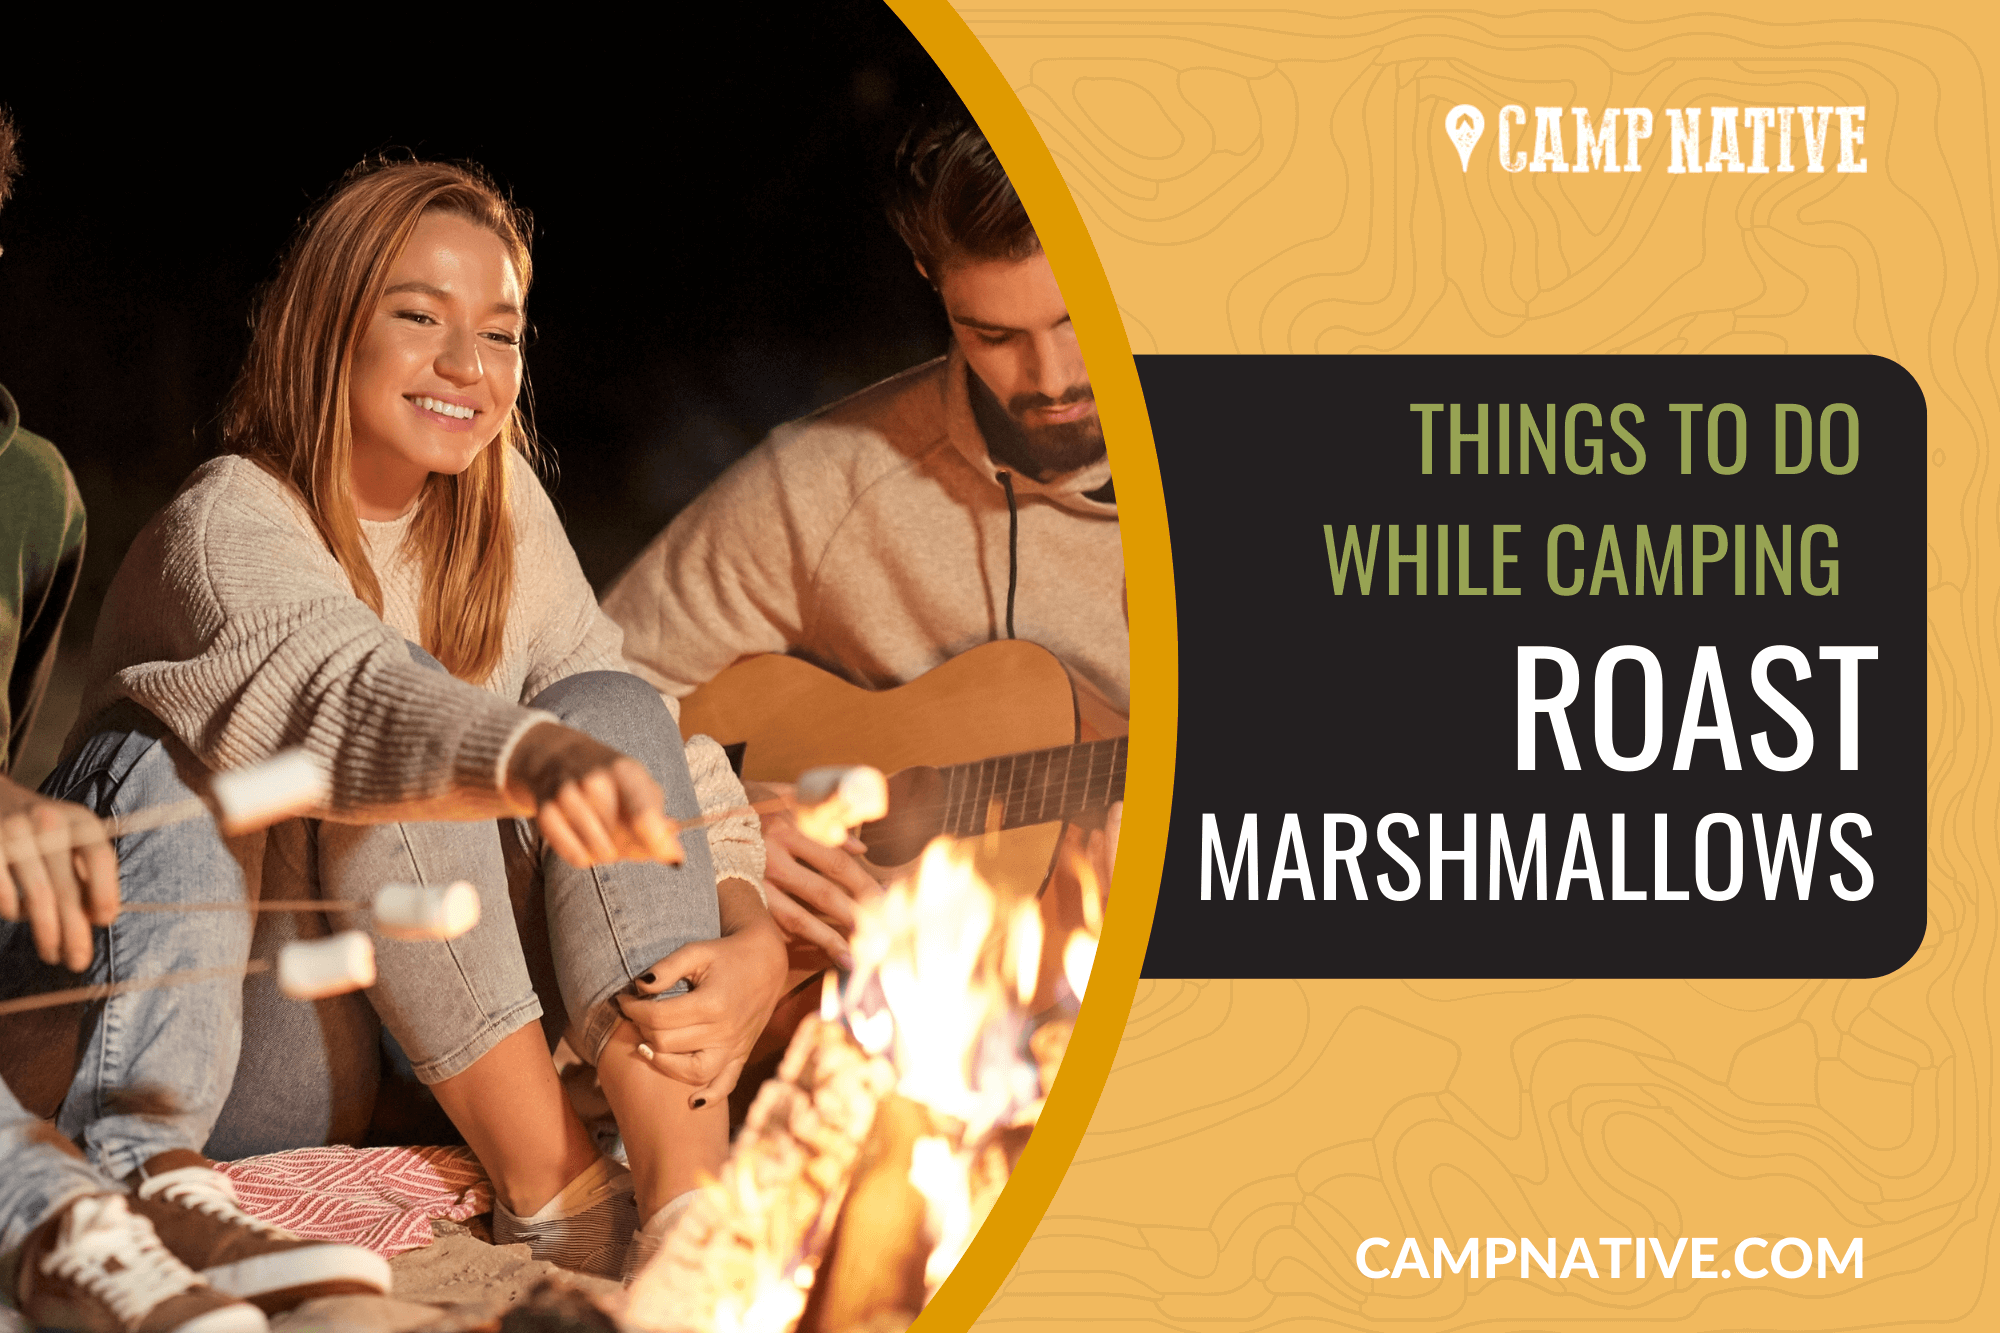 THINGS TO DO WHILE CAMPING ROAST MARSHMALLOWS